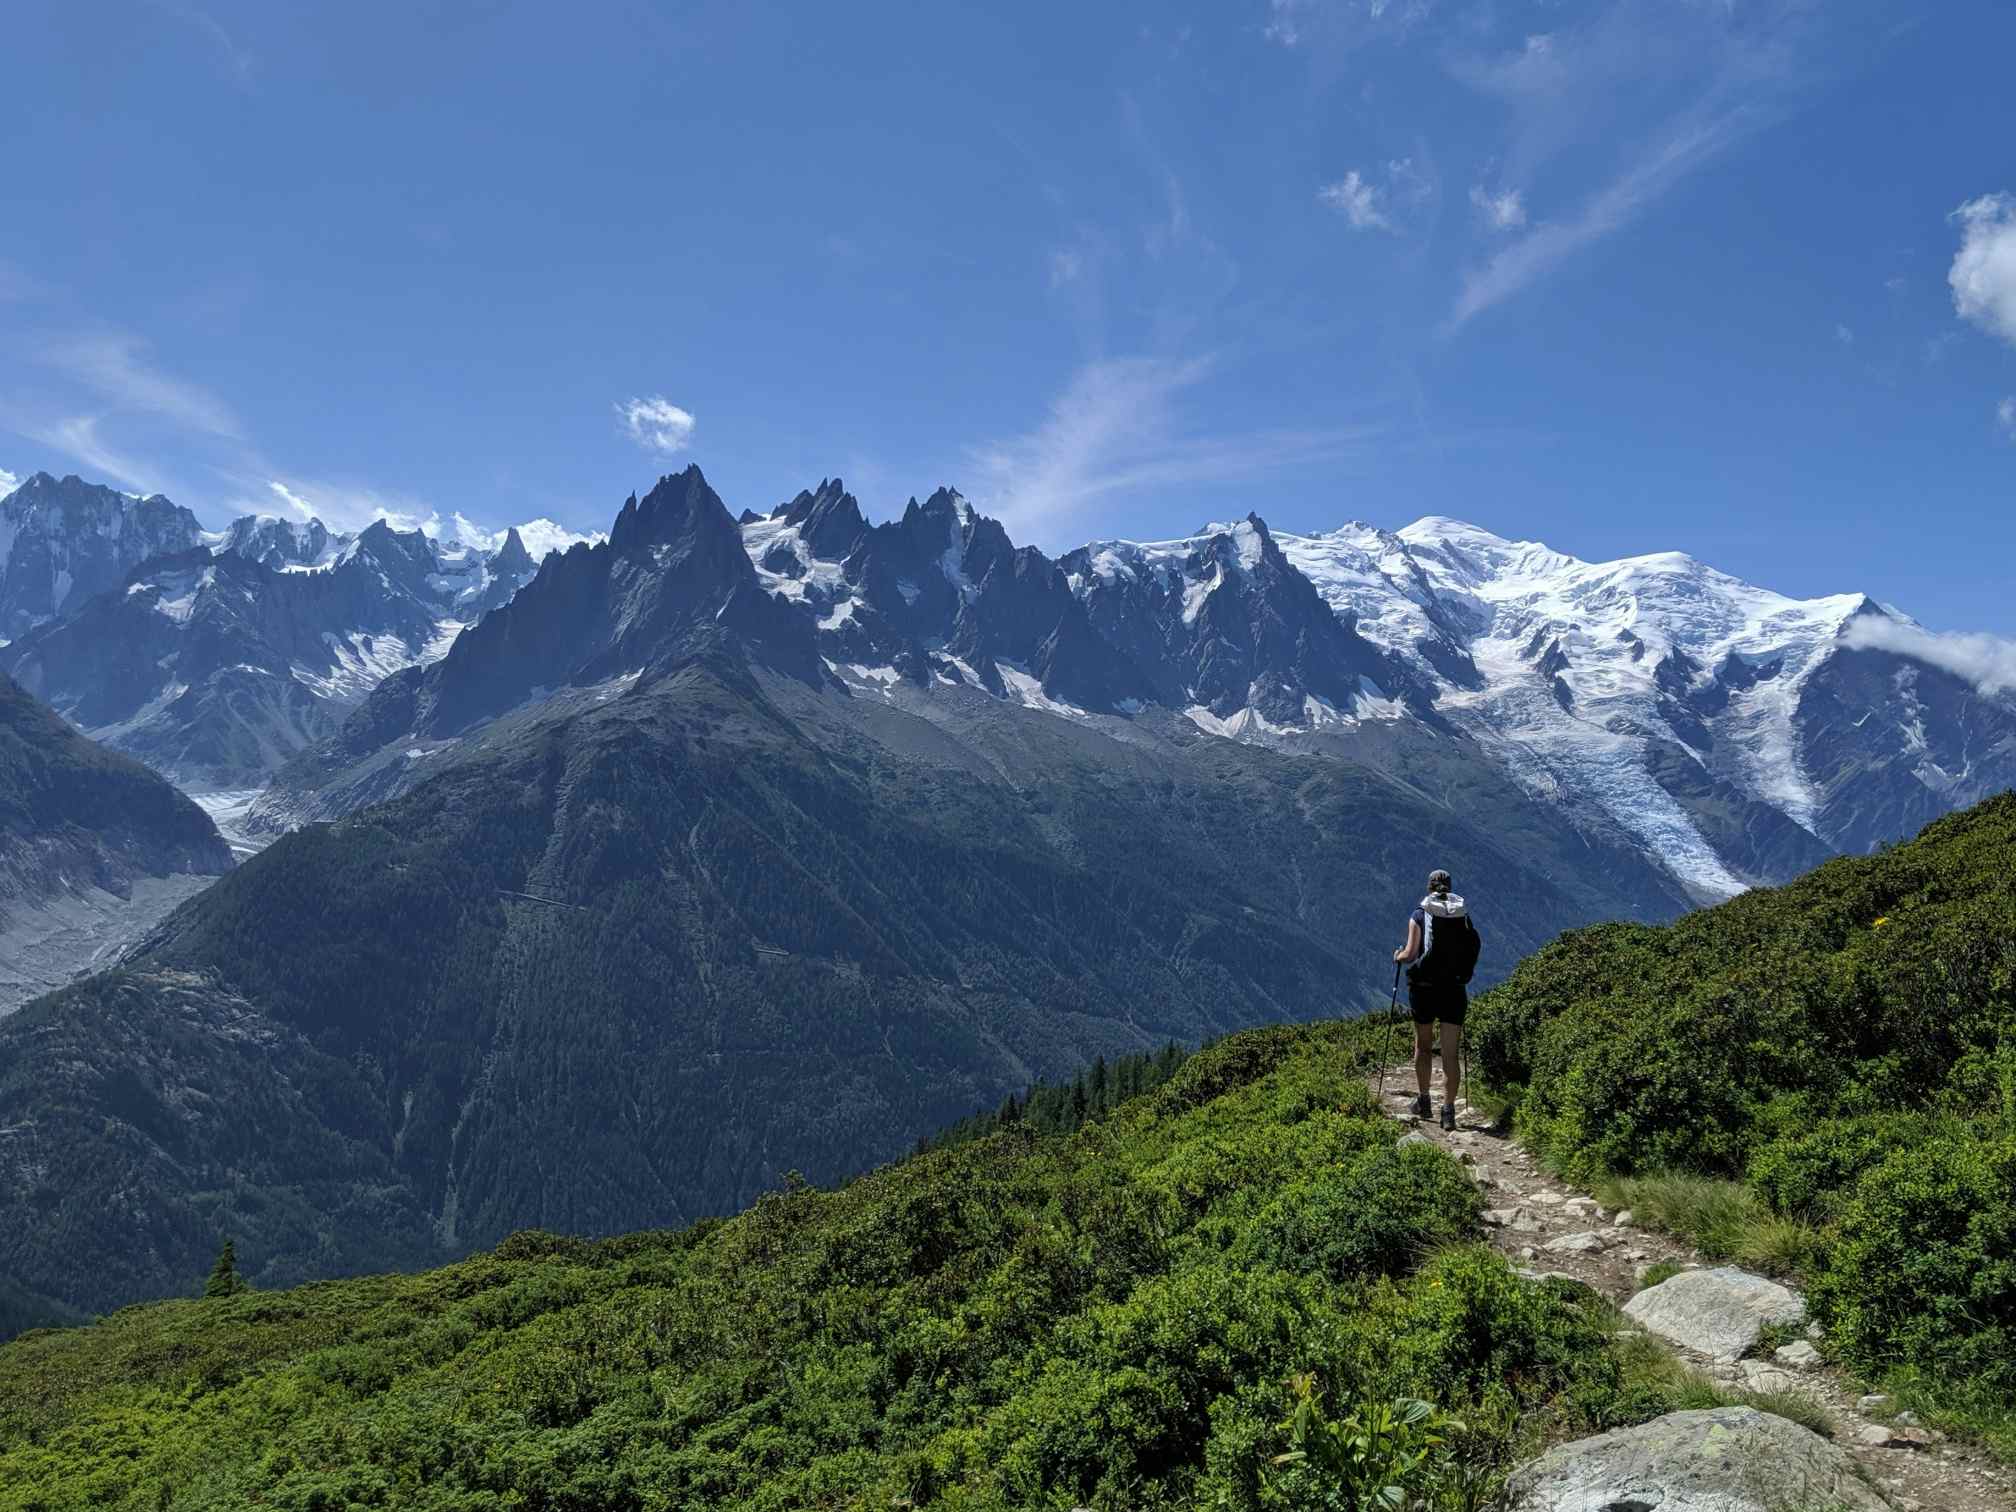 Hiker on the Tour du Mont Blanc trail, France. Photo: Canva - https://www.canva.com/photos/MADqjk6b0Gg-a-hiker-walking-on-a-path-during-the-famous-trek-tour-du-mont-blanc-beautiful-alpine-view-on-snowy-mountains-with-blue-sky-on-a-sunny-morning/